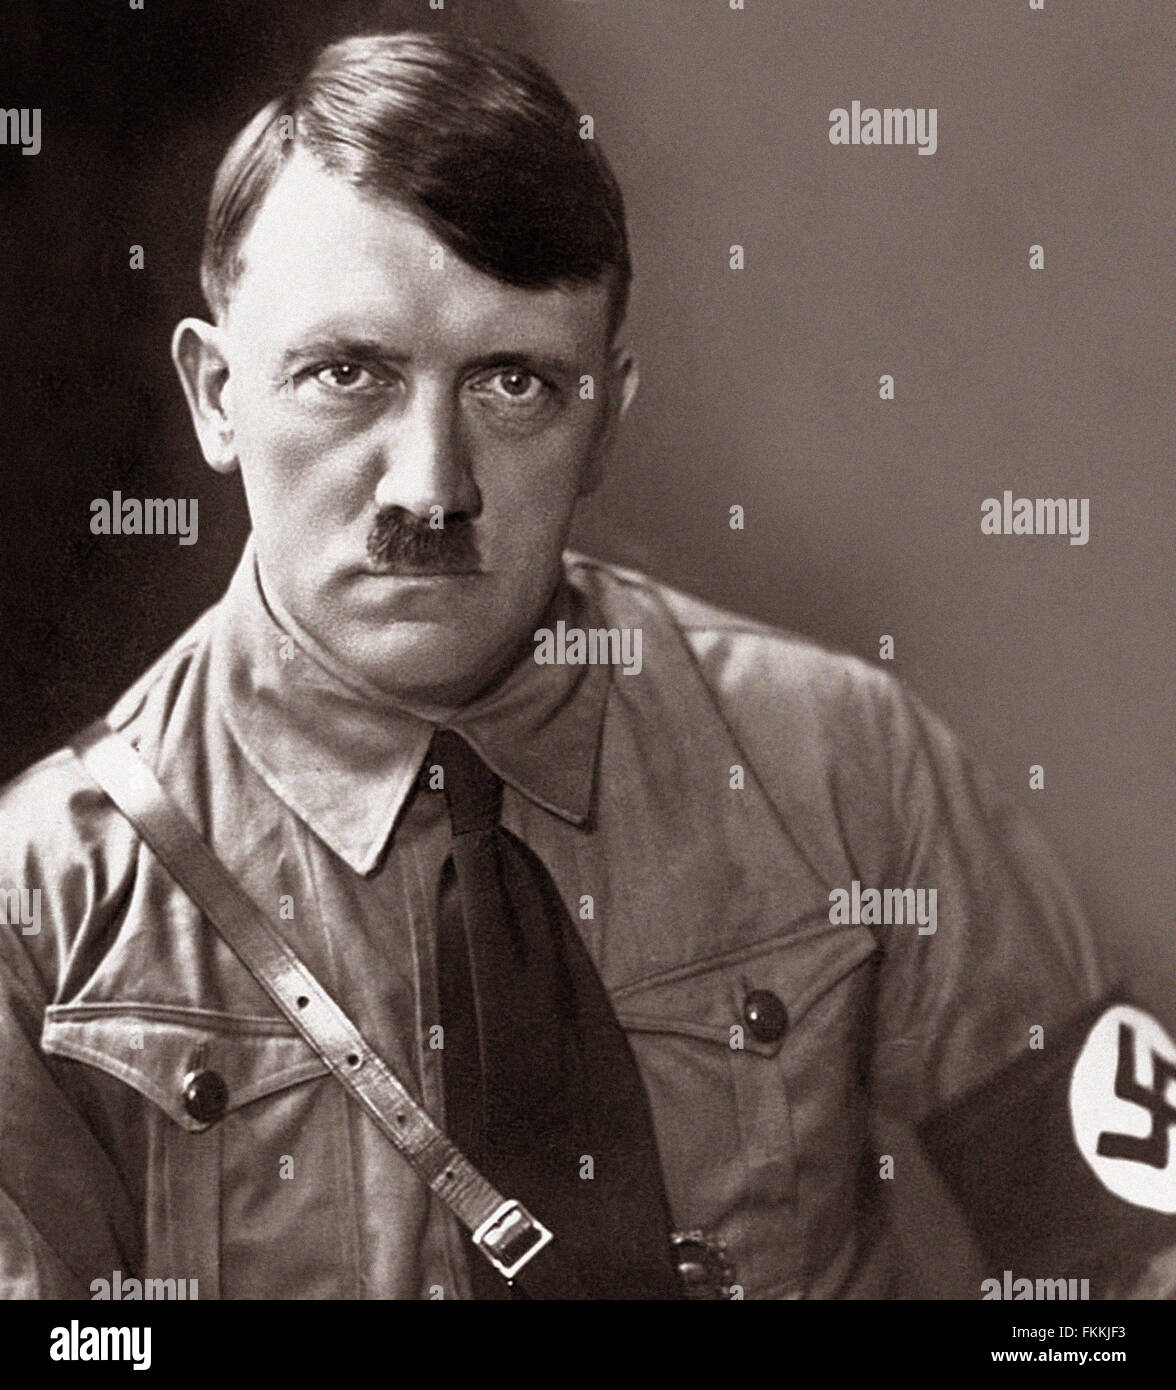 Portrait of Adolf HITLER German wartime leader. New scan from the archives of Press Portrait Service - formerly Press Portrait Bureau. Stock Photo